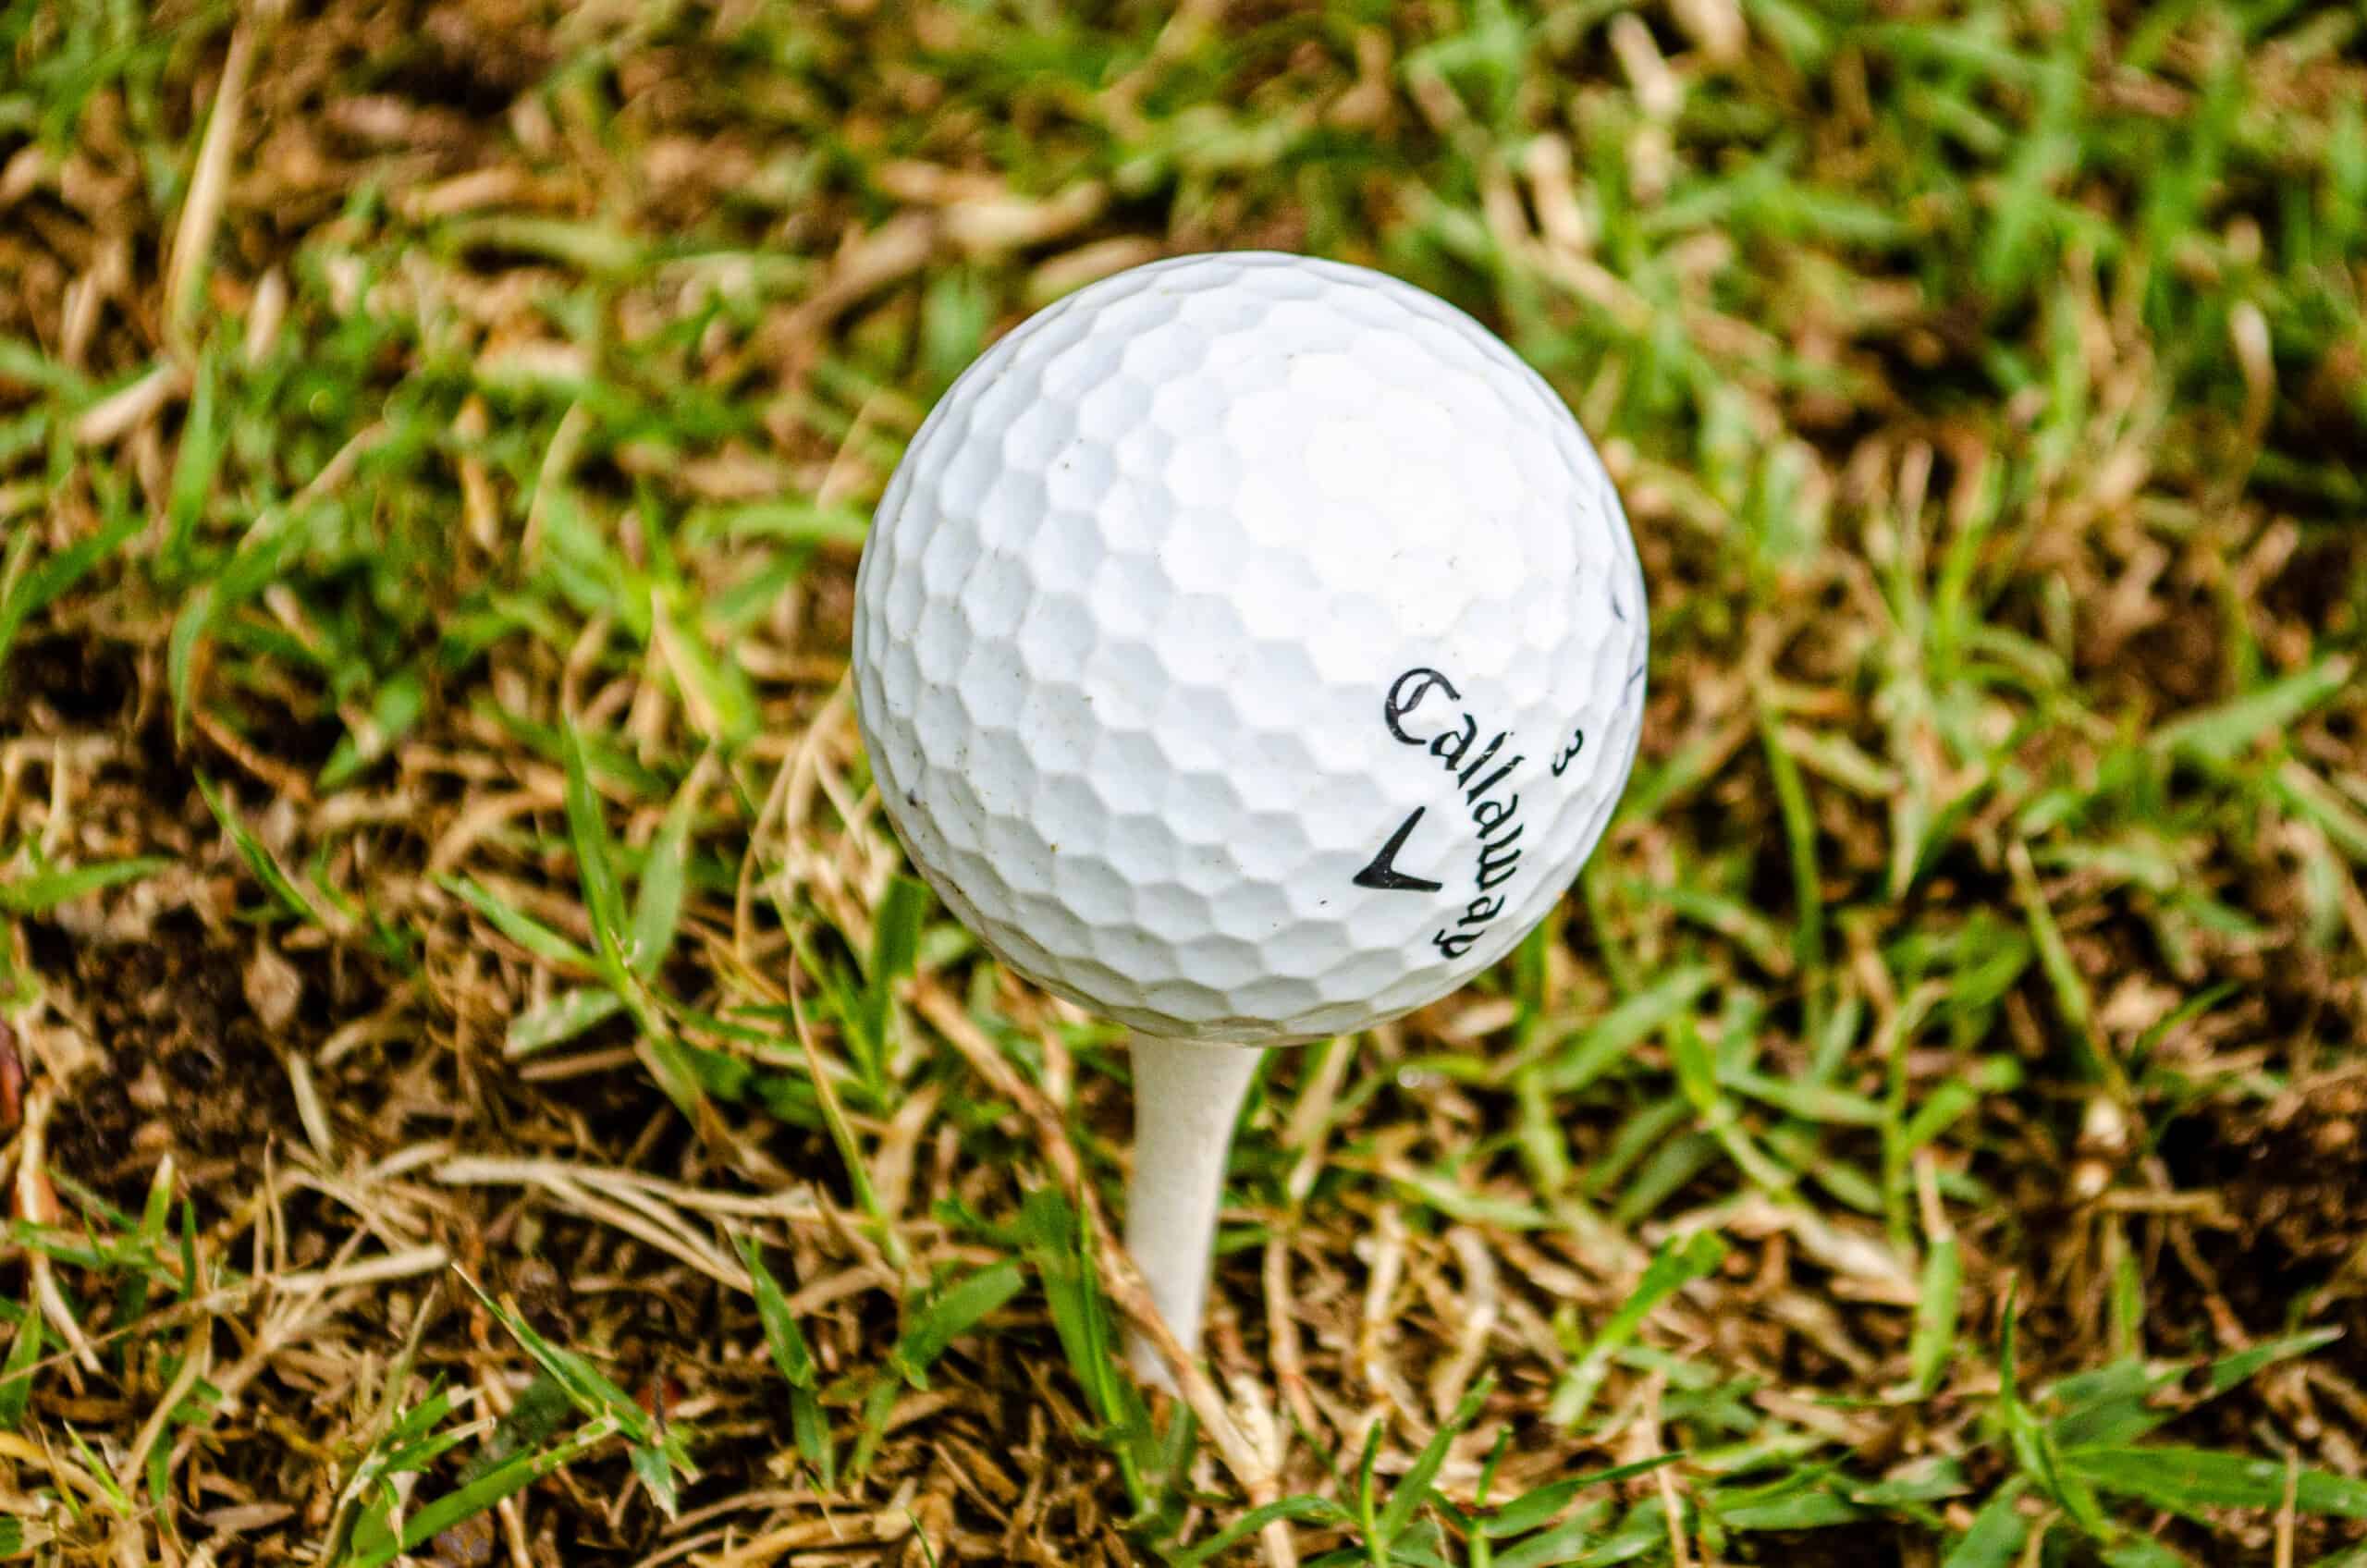 how to sell used golf balls